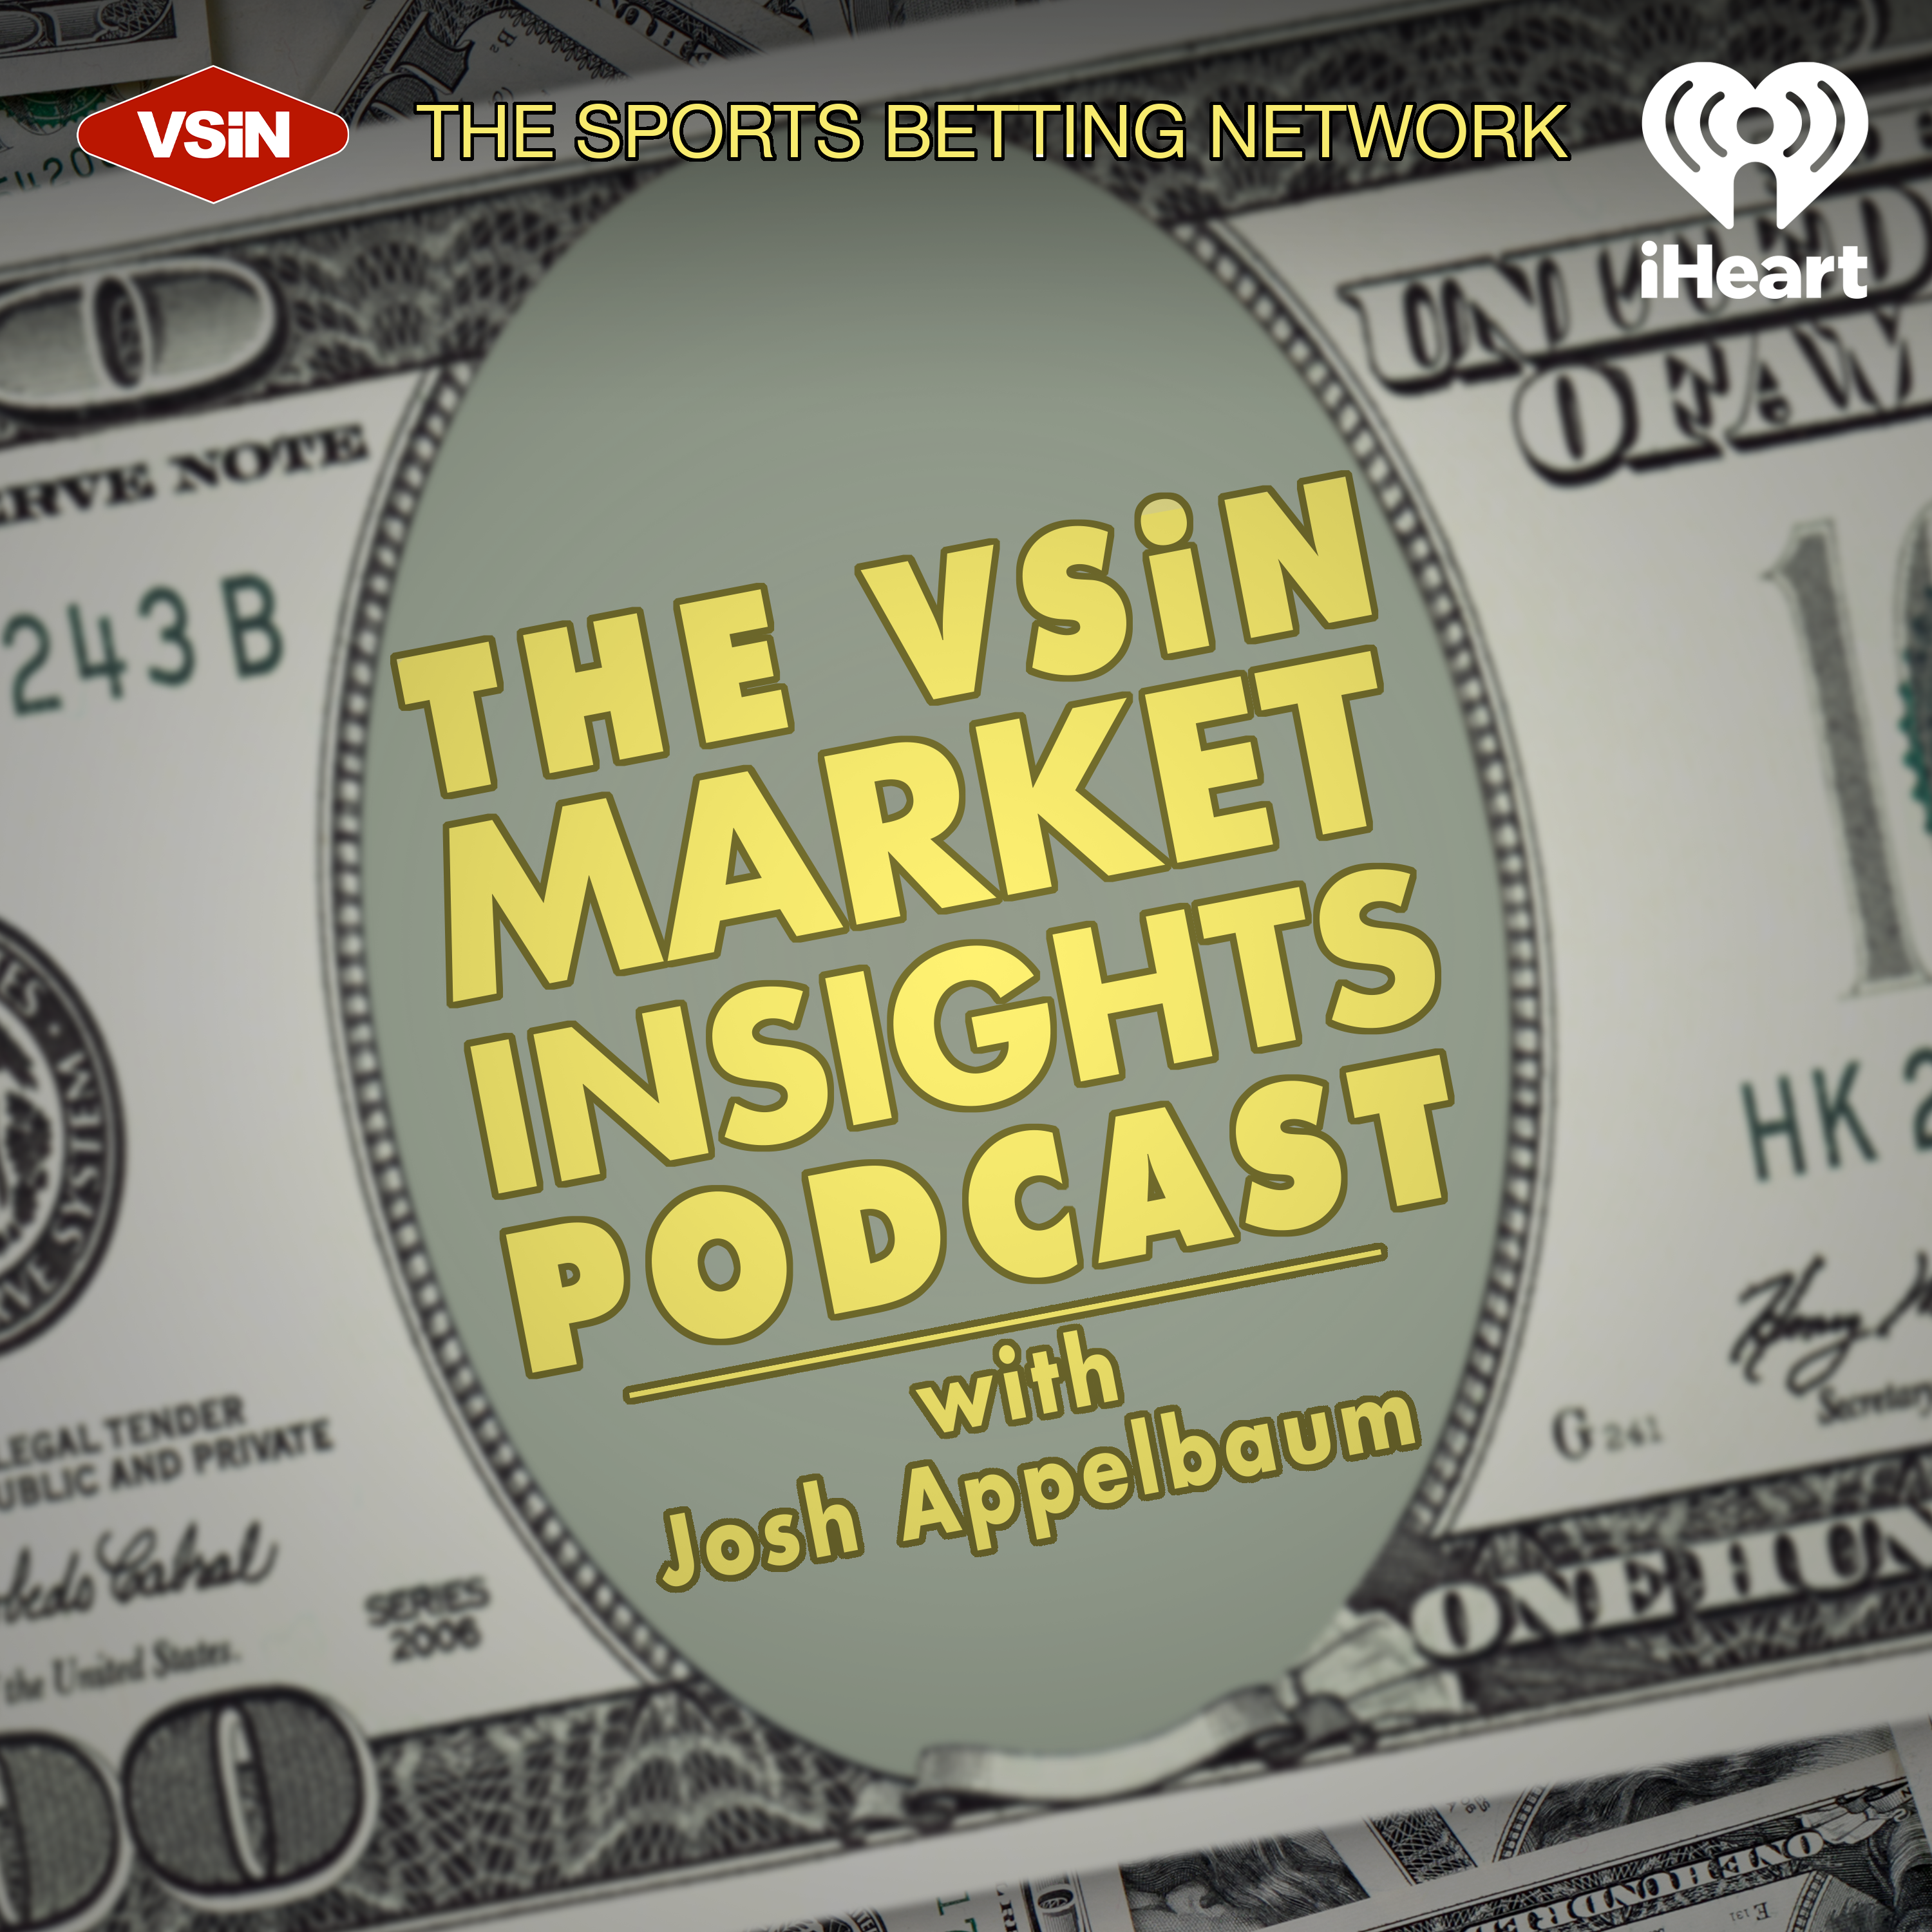 The VSiN Market Insights Podcast with Josh Appelbaum | February 7, 2022